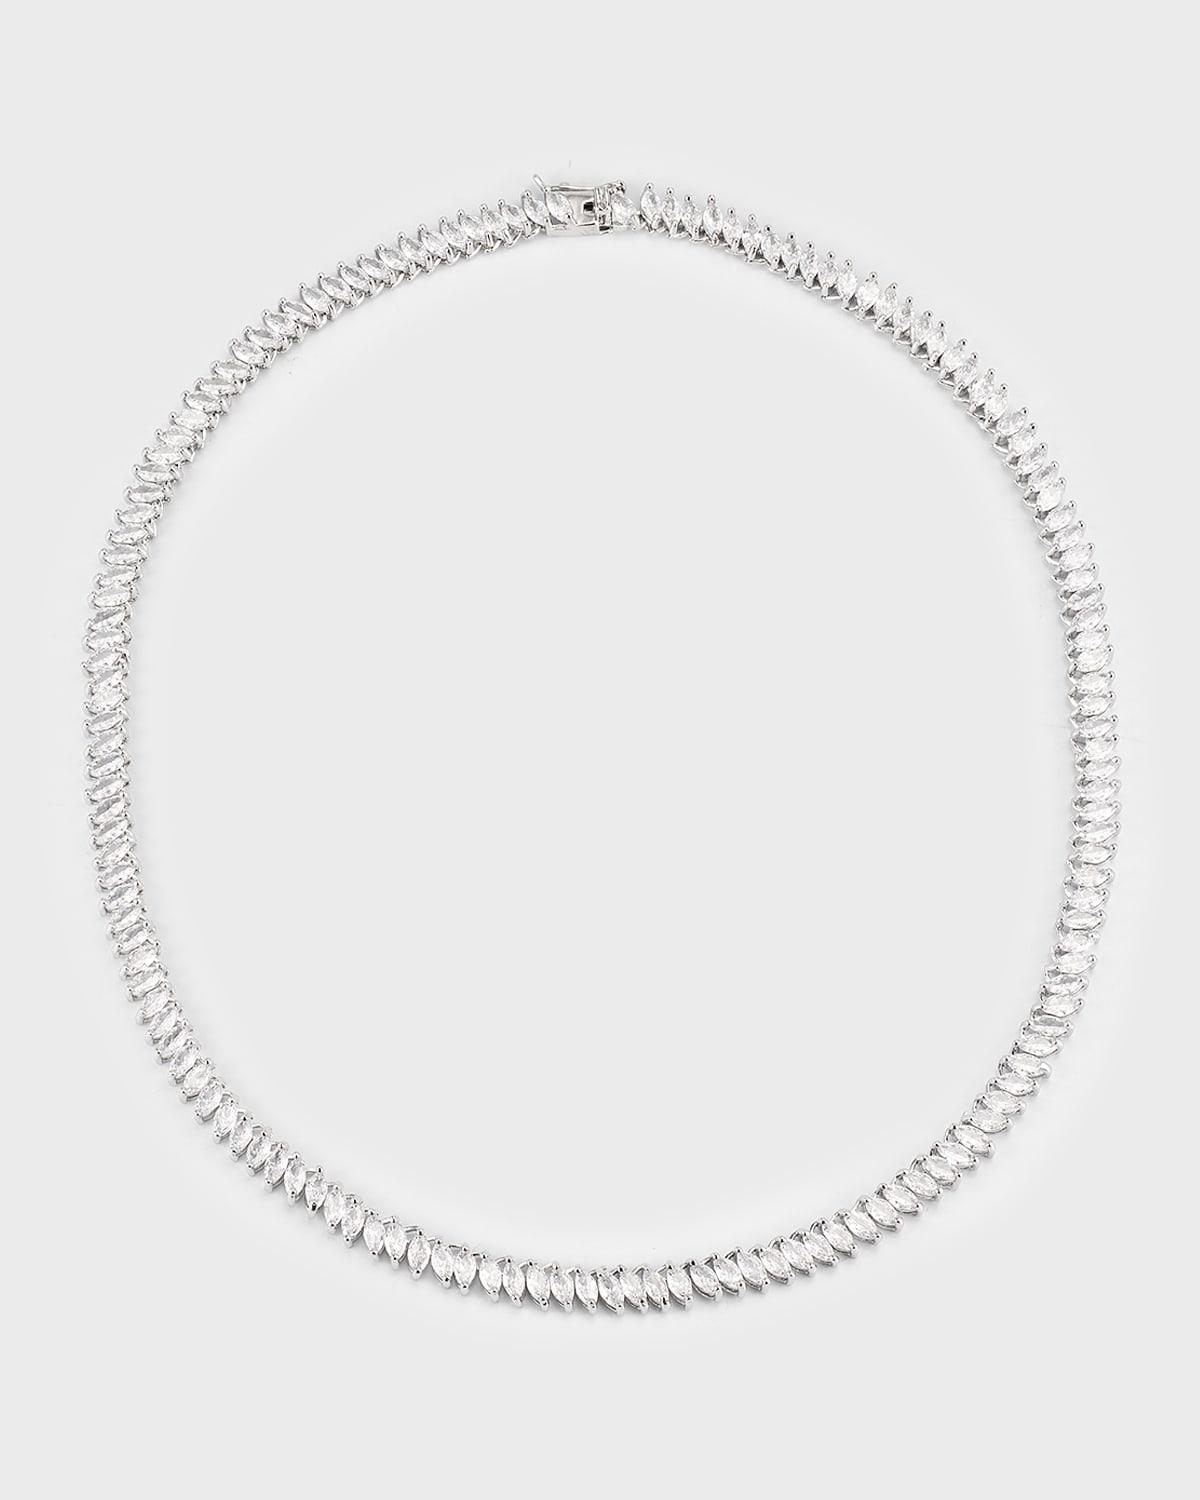 FALLON Kelly Marquise Cubic Zirconia Tennis Necklace